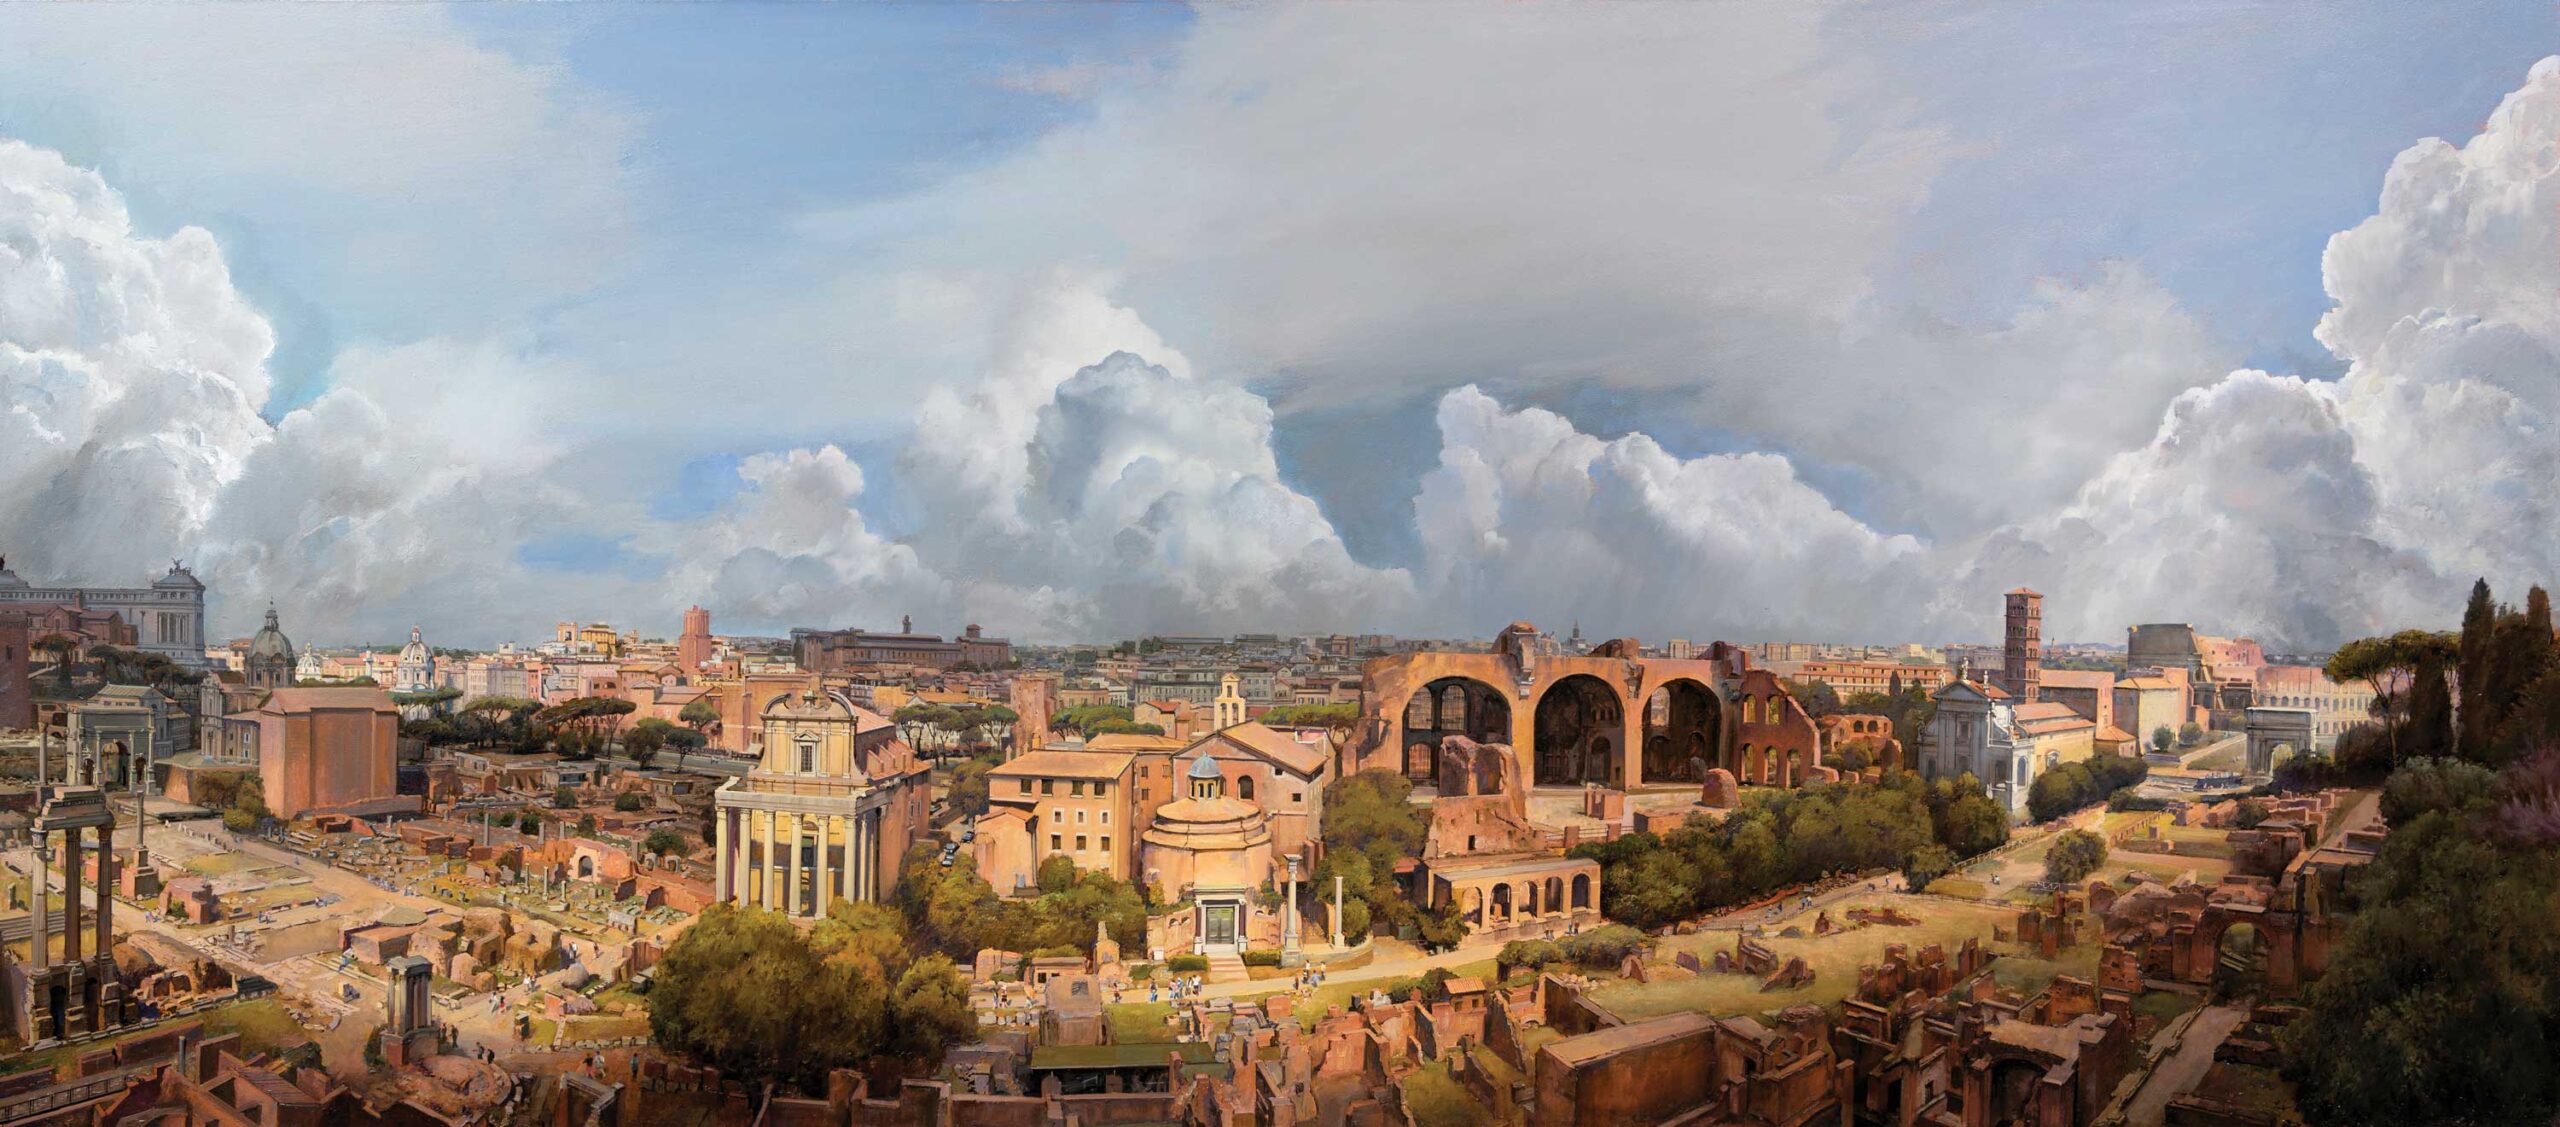 Joel Babb, "Rome from the Palatine Hill," 2021, oil on linen, 32 x 72 in., private collection